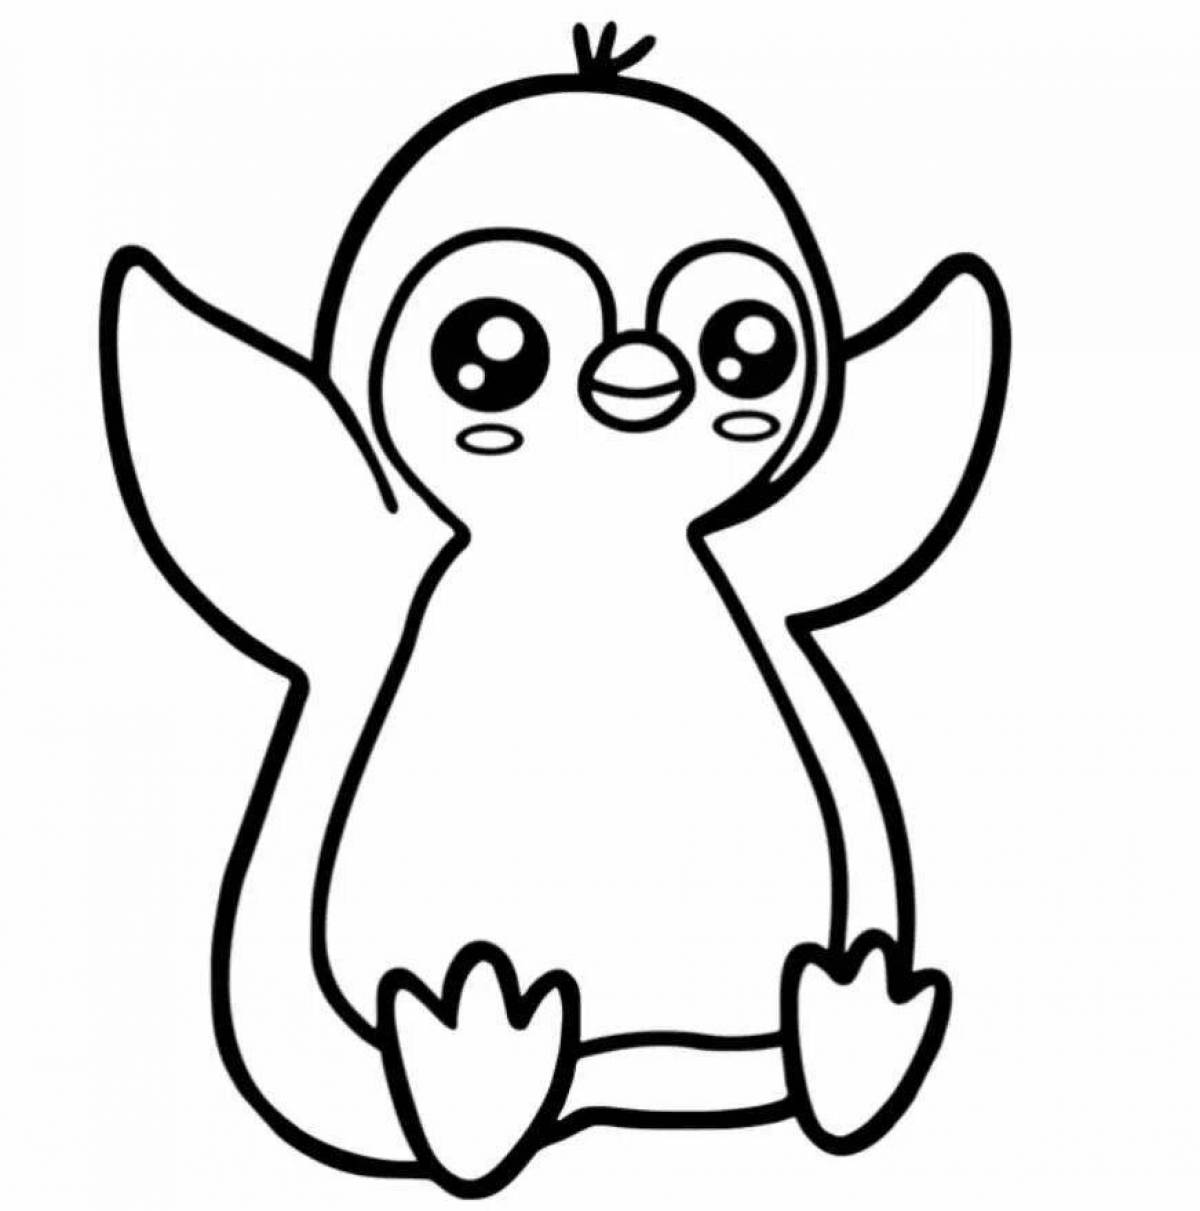 Walking penguin coloring page